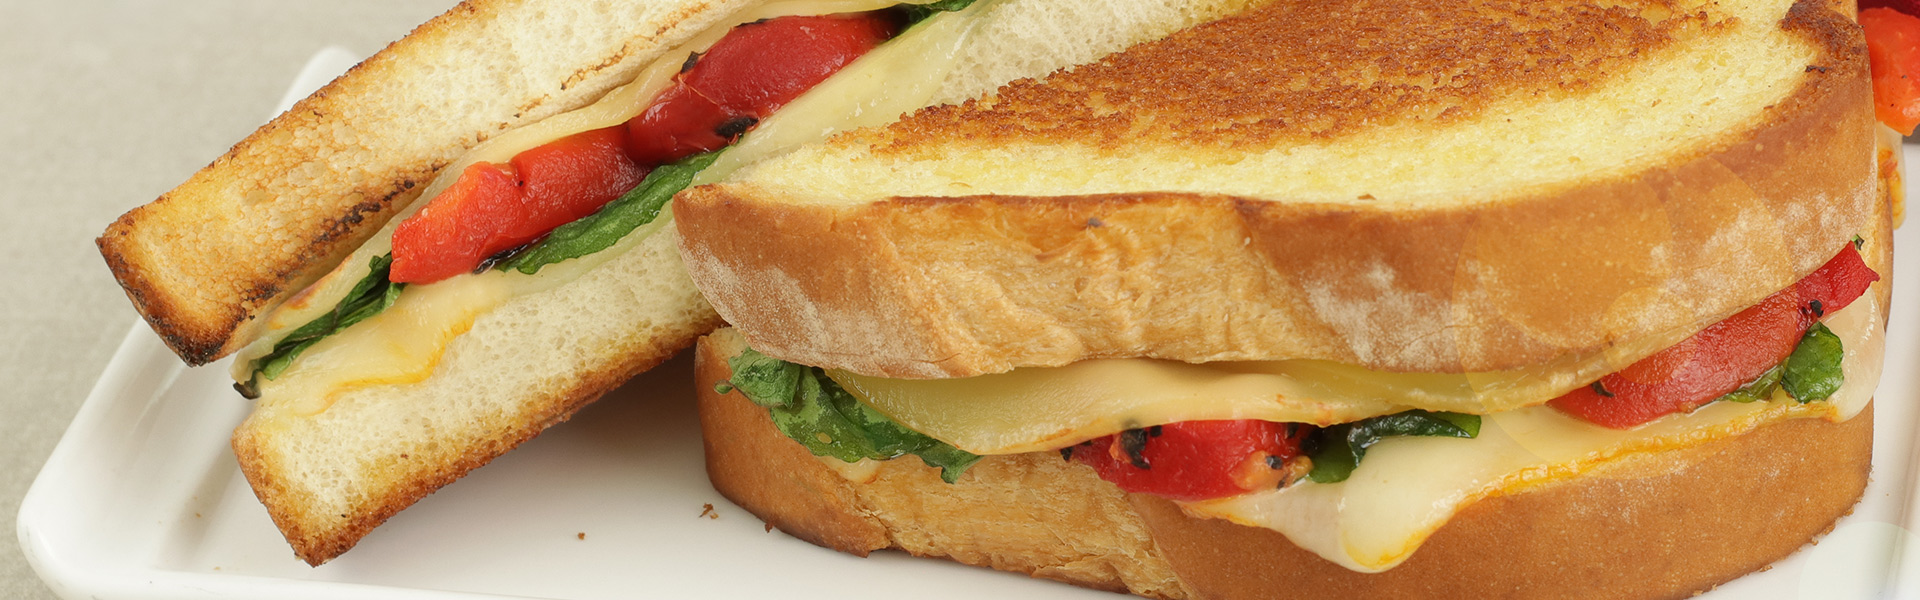 Smoked-Gouda-Arugula-and-Roasted-Red-Pepper-Sandwich